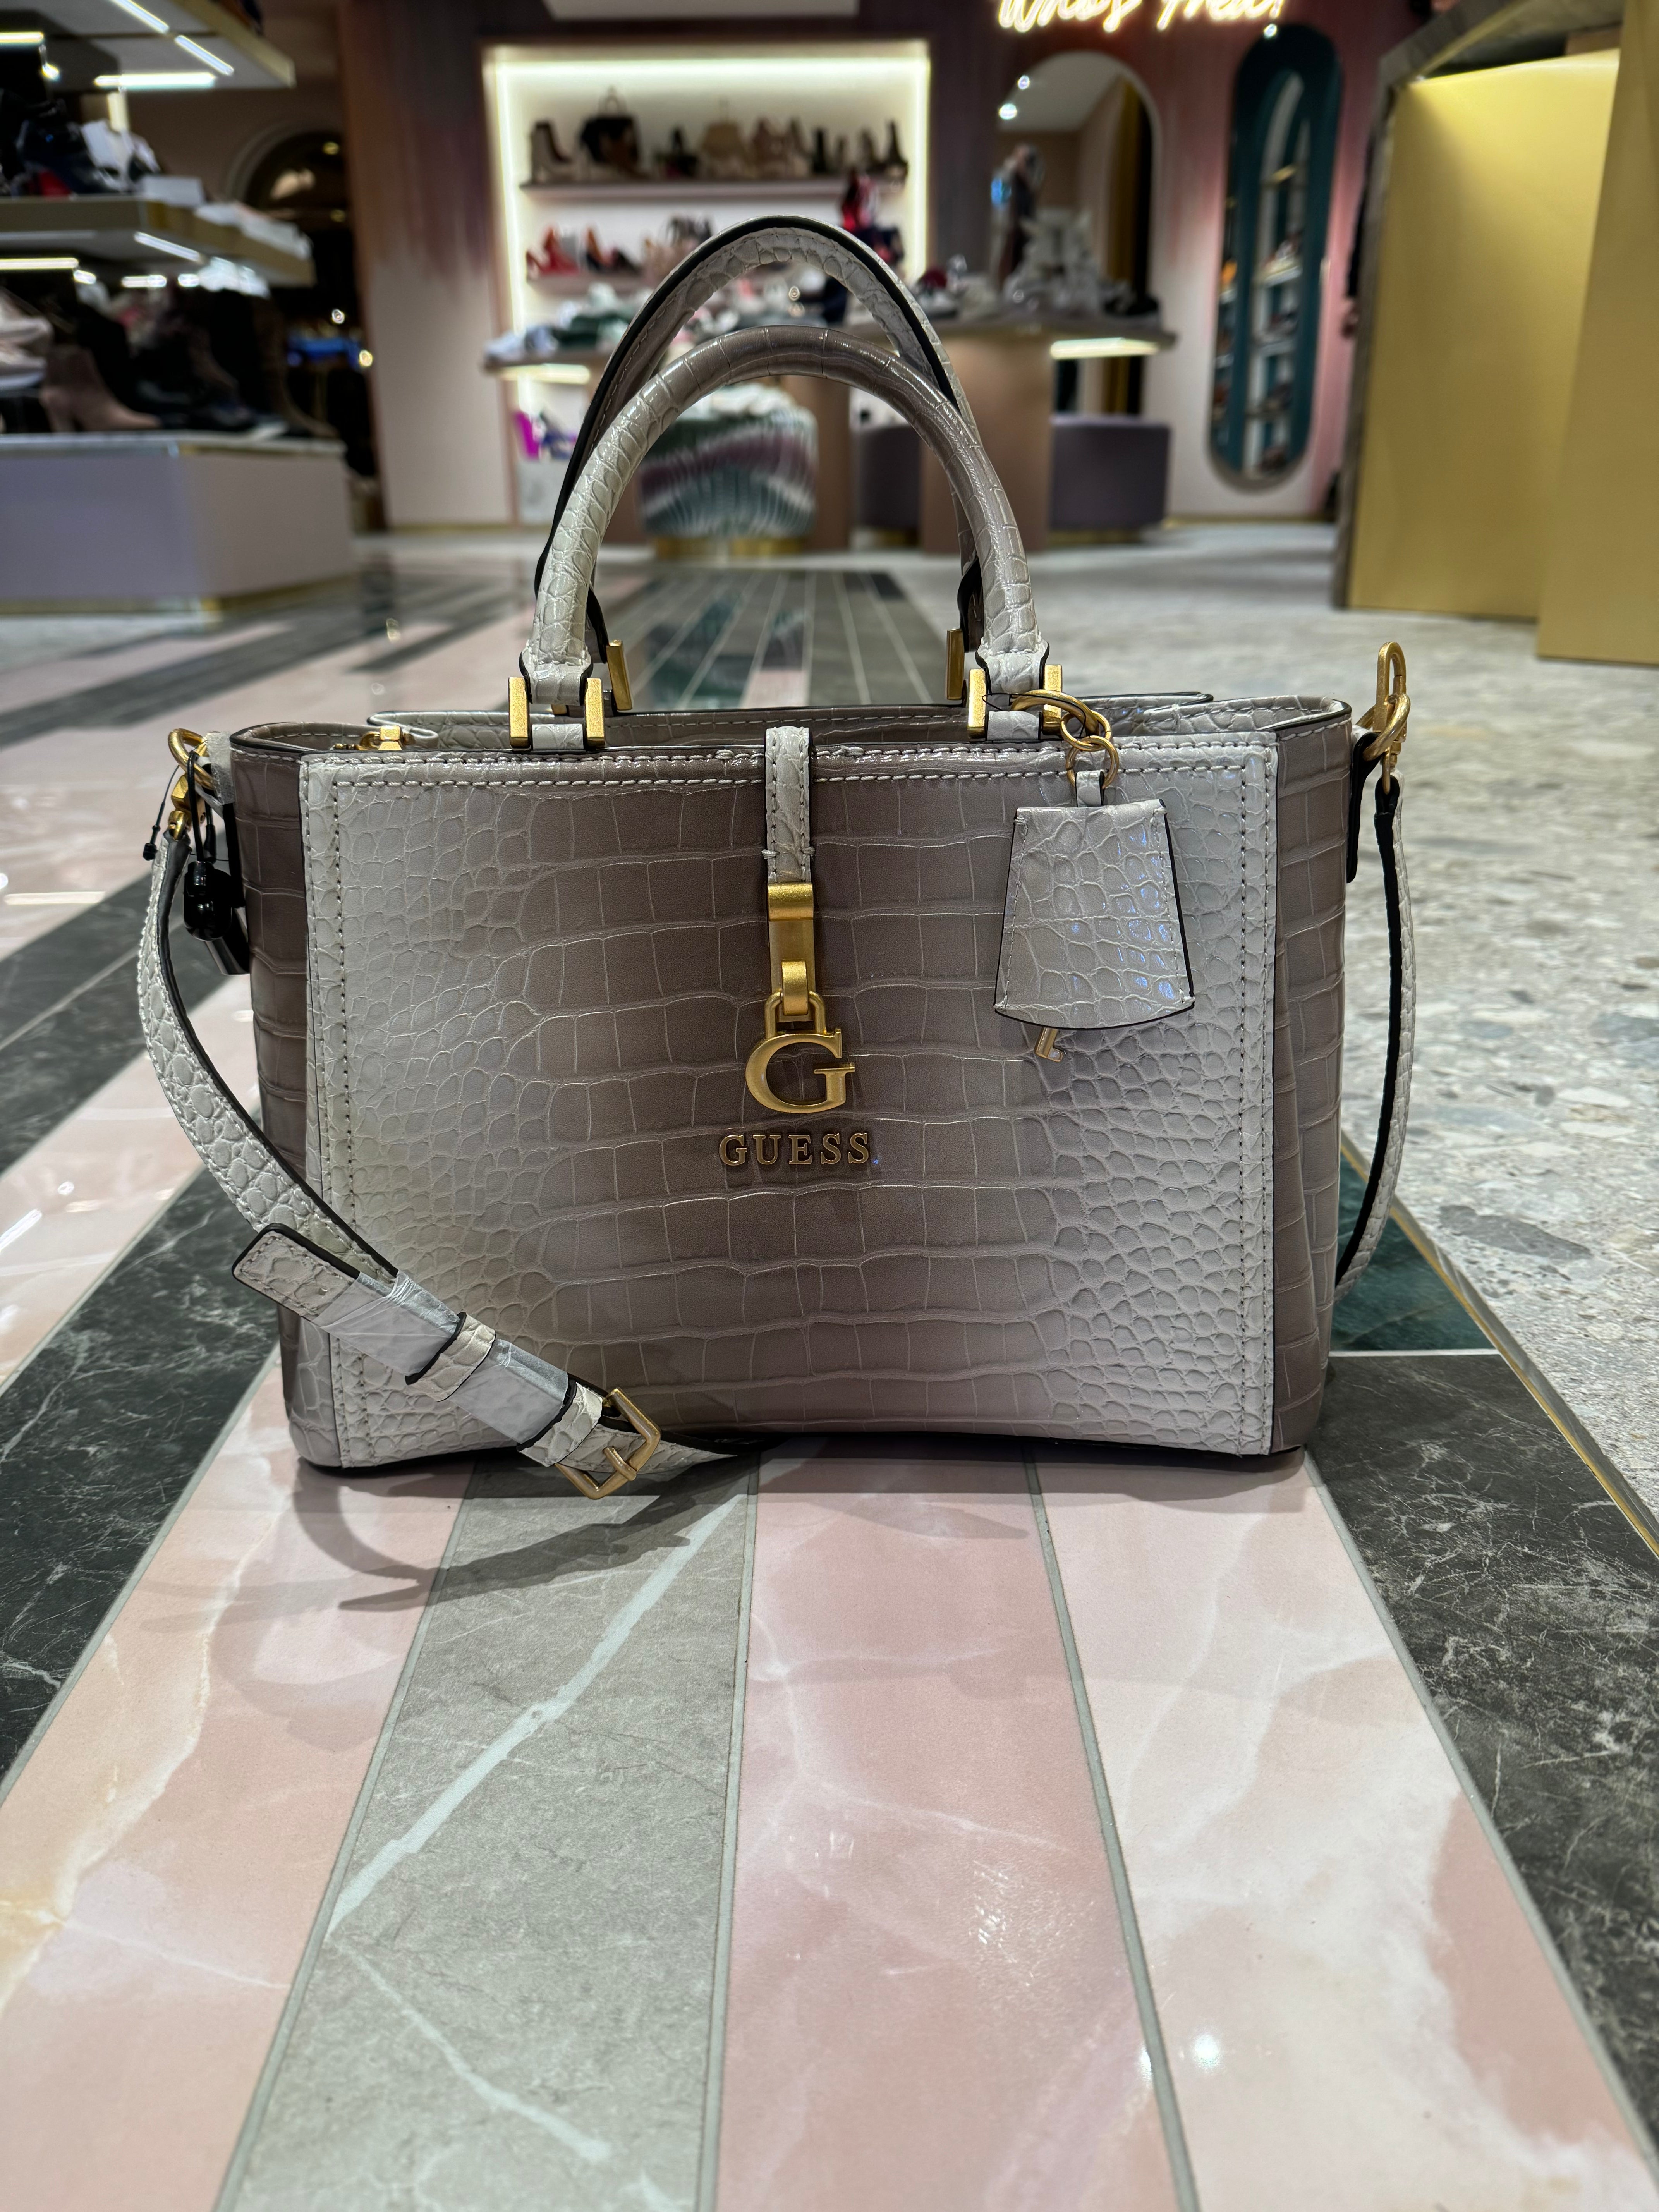 Satchel Bags & Purses | All Styles, Sizes & Colors | GUESS